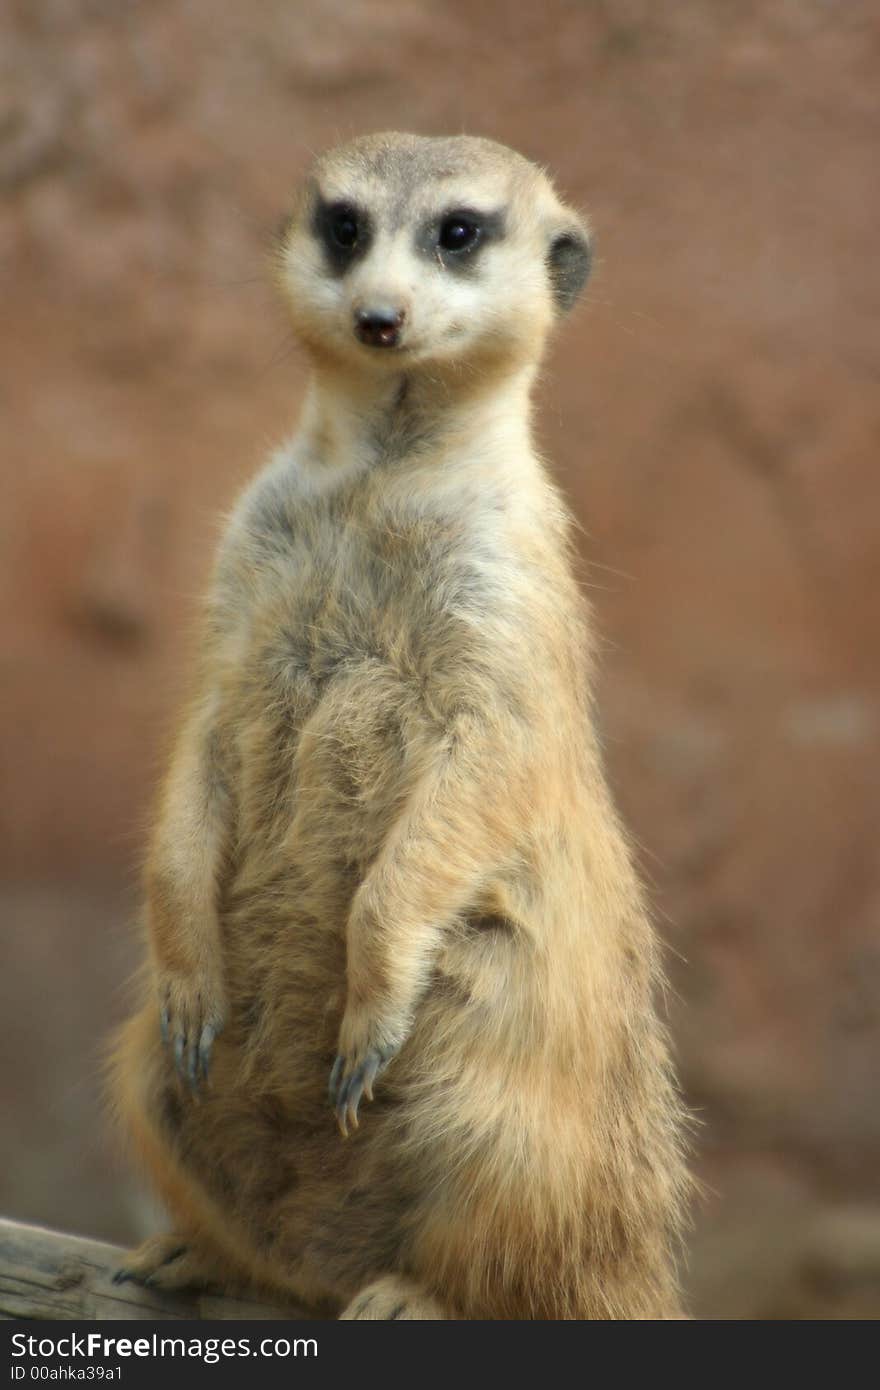 Photo of a meerkat posing for the camera..